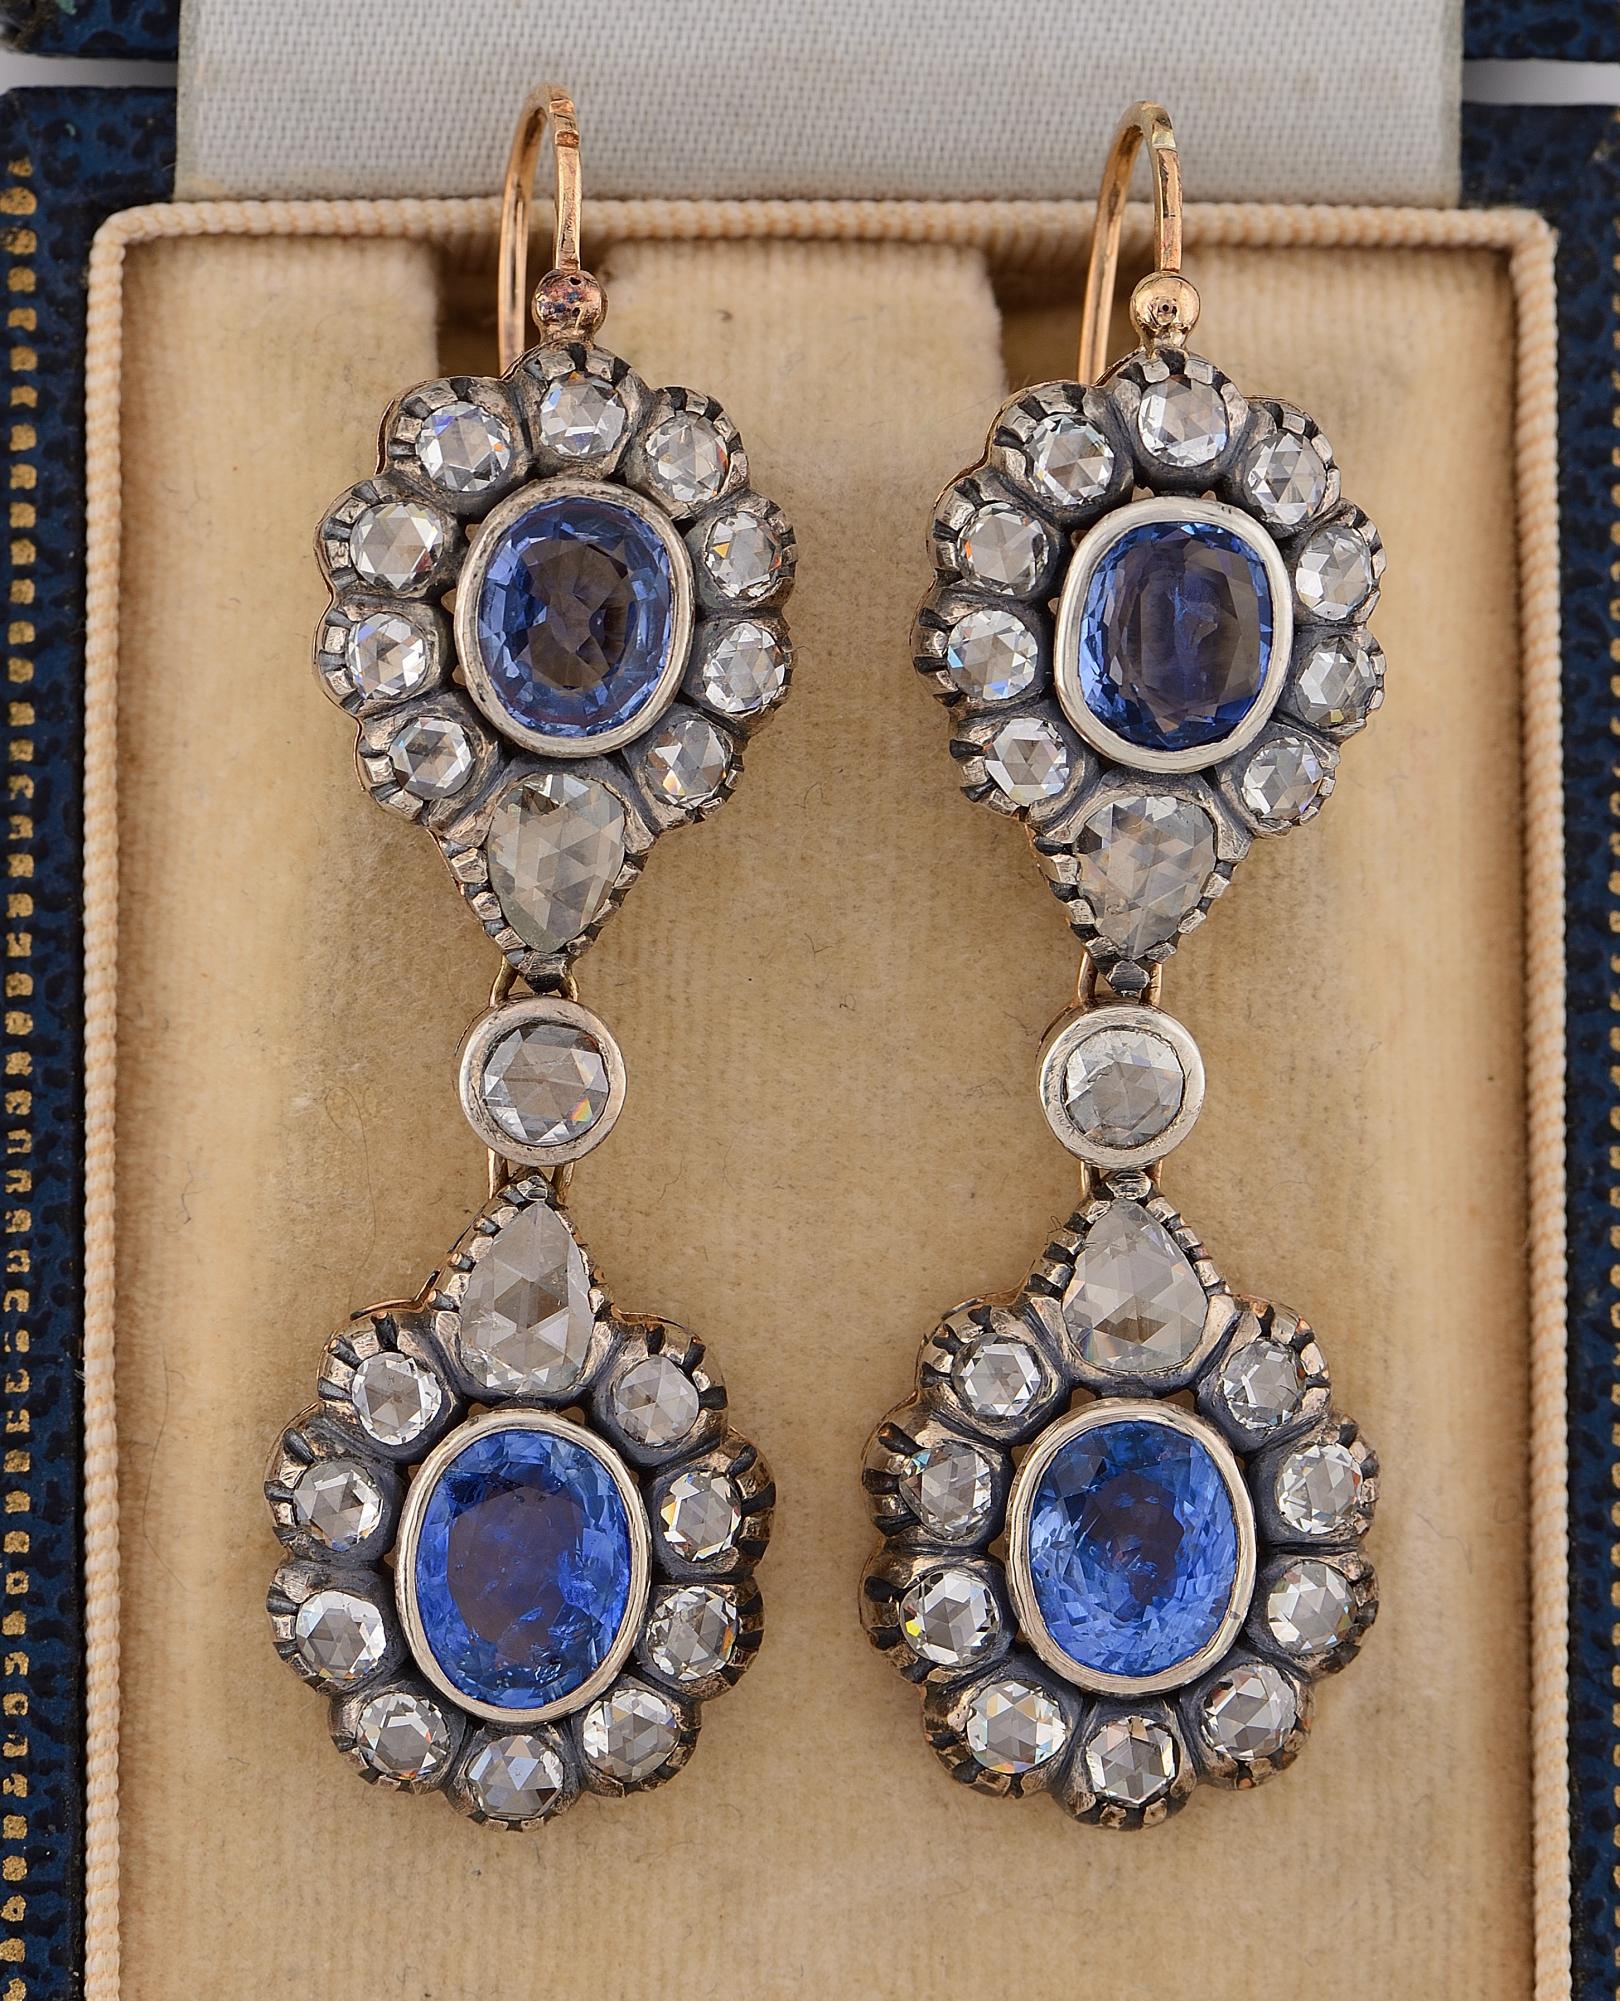 Victorian period Diamond and Sapphire earrings, 1880 ca
Hand fabricated in solid 18 KT gold topped by silver
Exquisitely designed in a double cluster for an amazing visual impact
They are set with a selection of 4 oval faceted 100% Natural